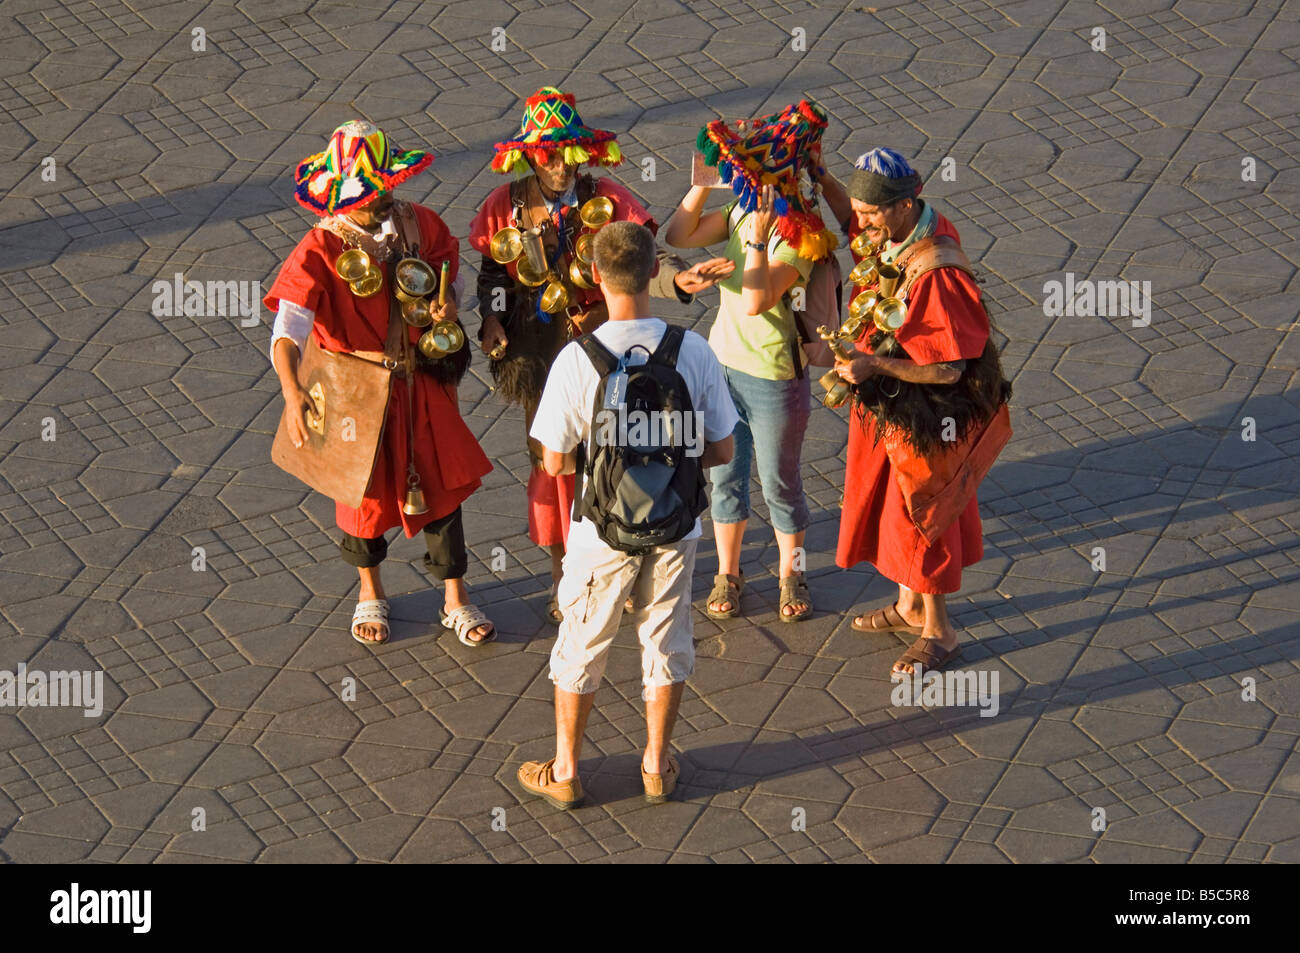 3 men in traditional dress as water carriers pose for a tourist camera at the Djemaa El Fna - the main market square of Marrakes Stock Photo